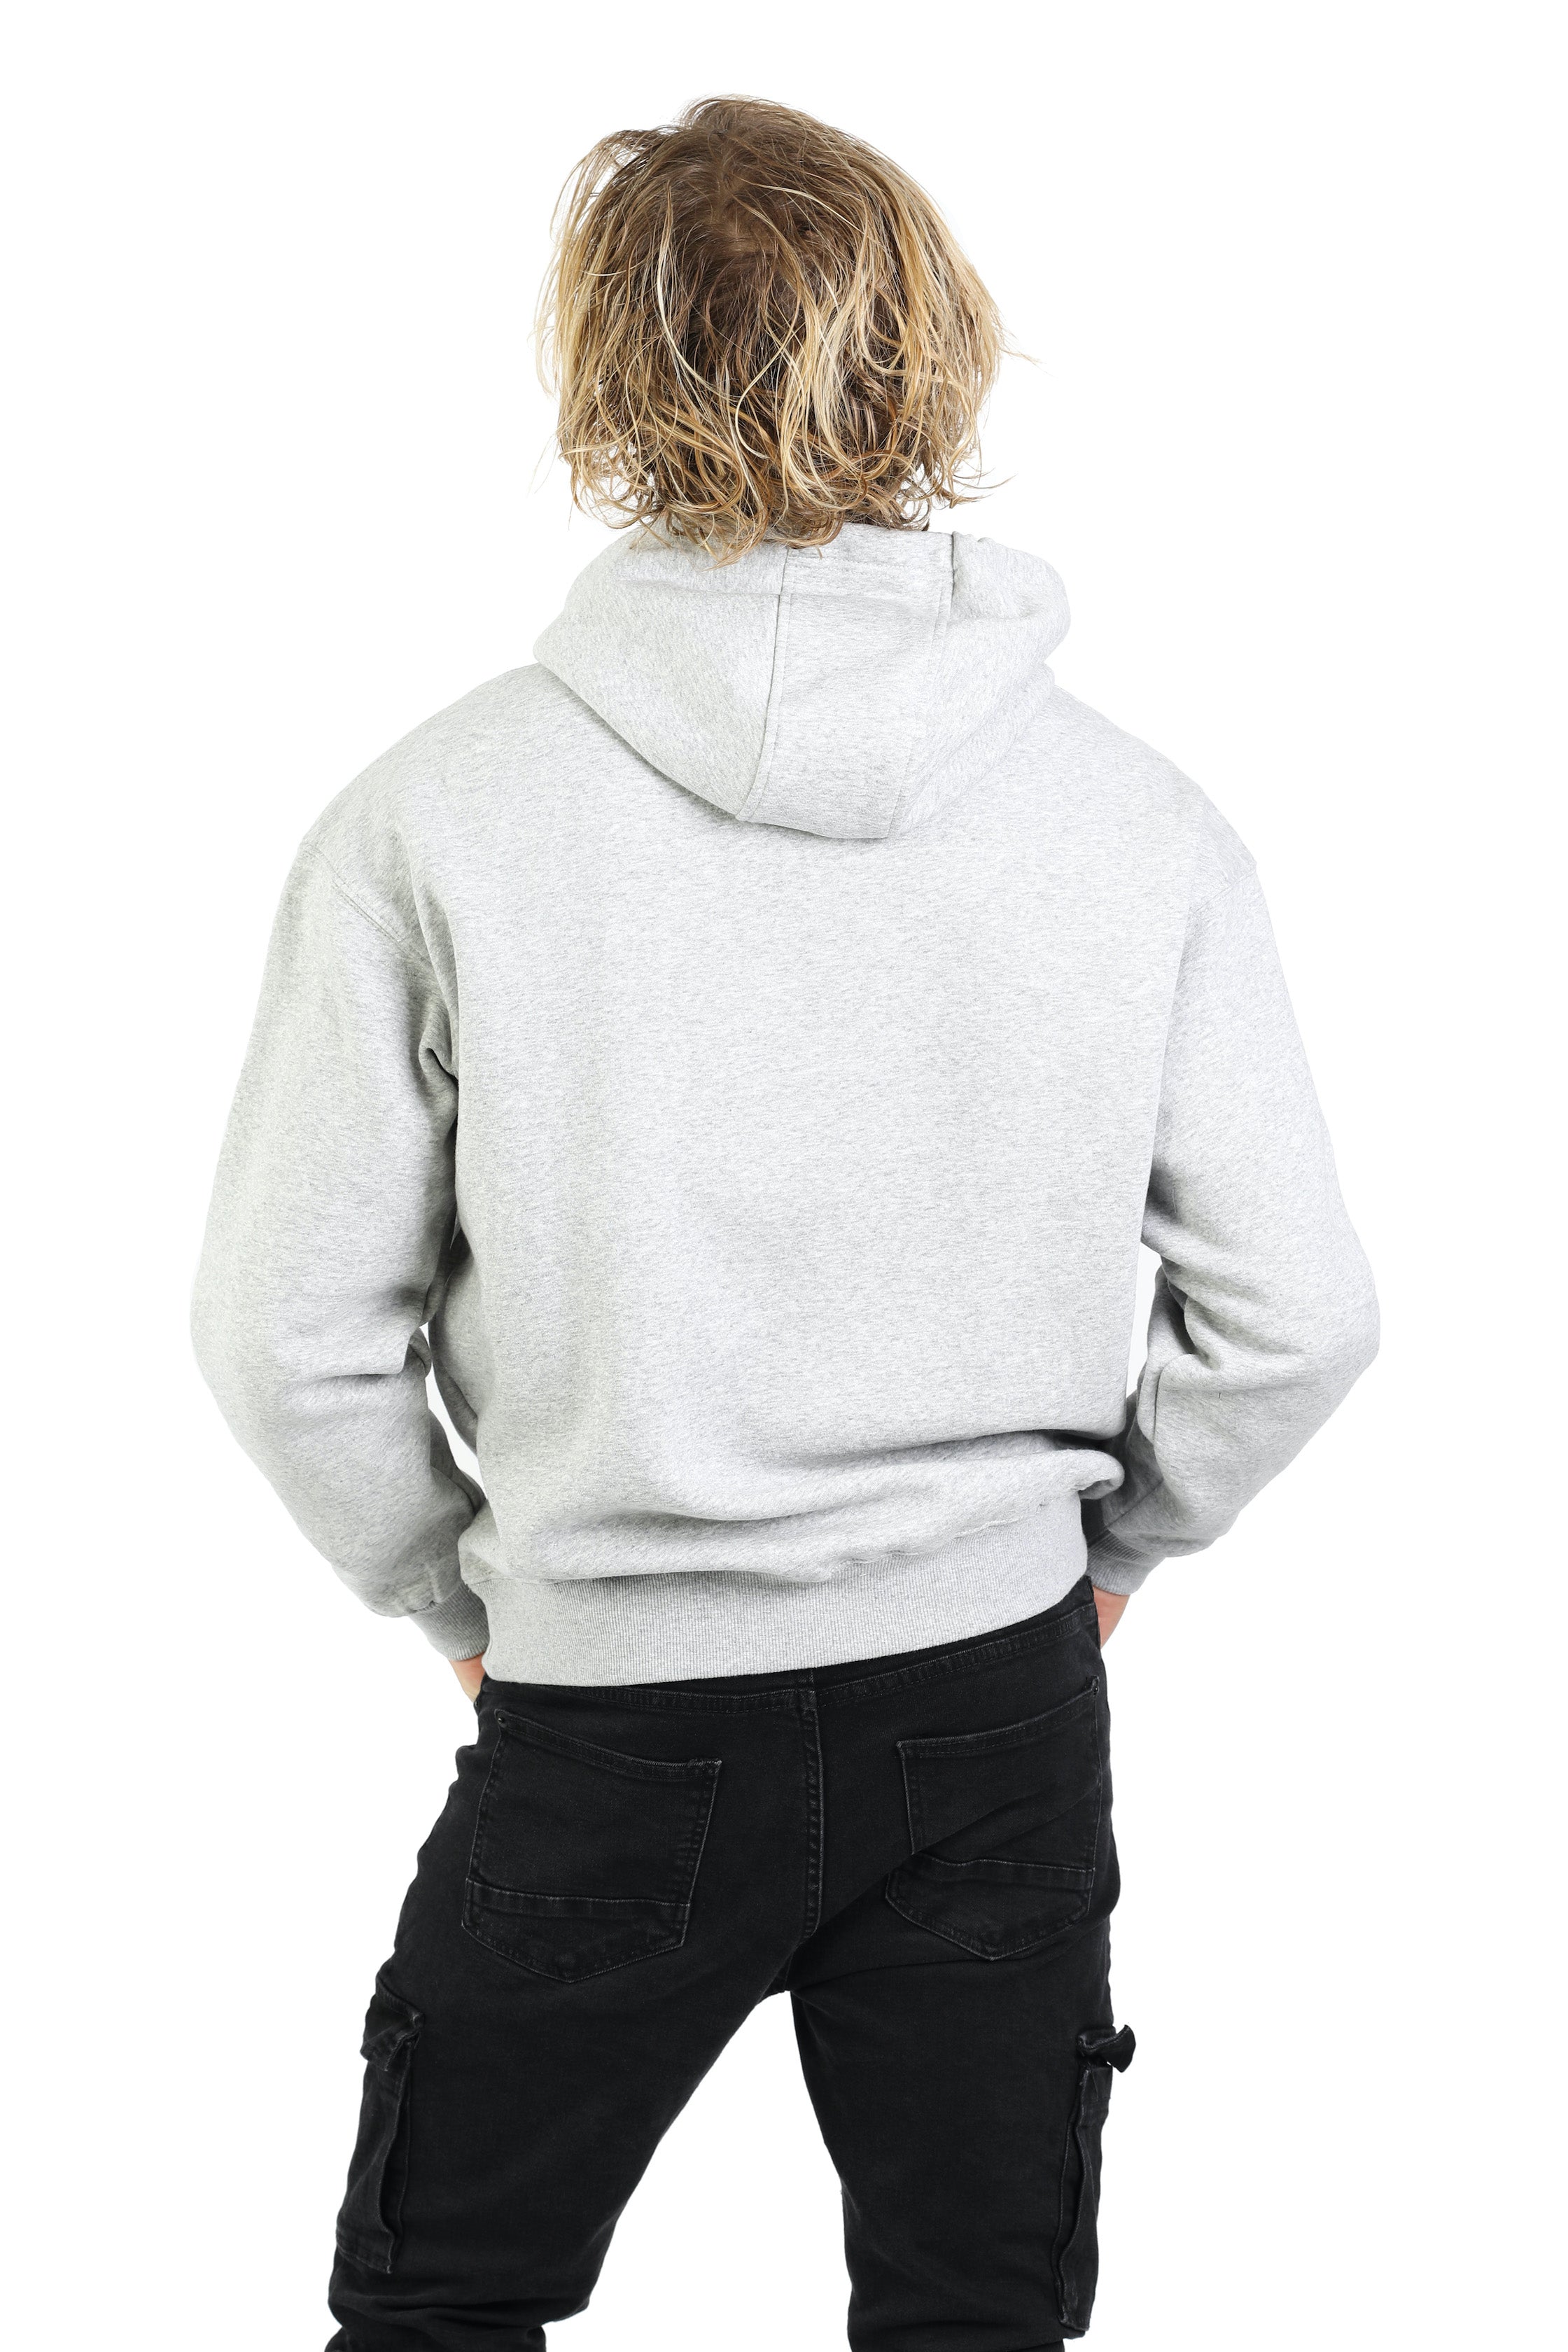 Men's hoodie in Classic grey from Lazypants - always a great buy at a reasonable price.